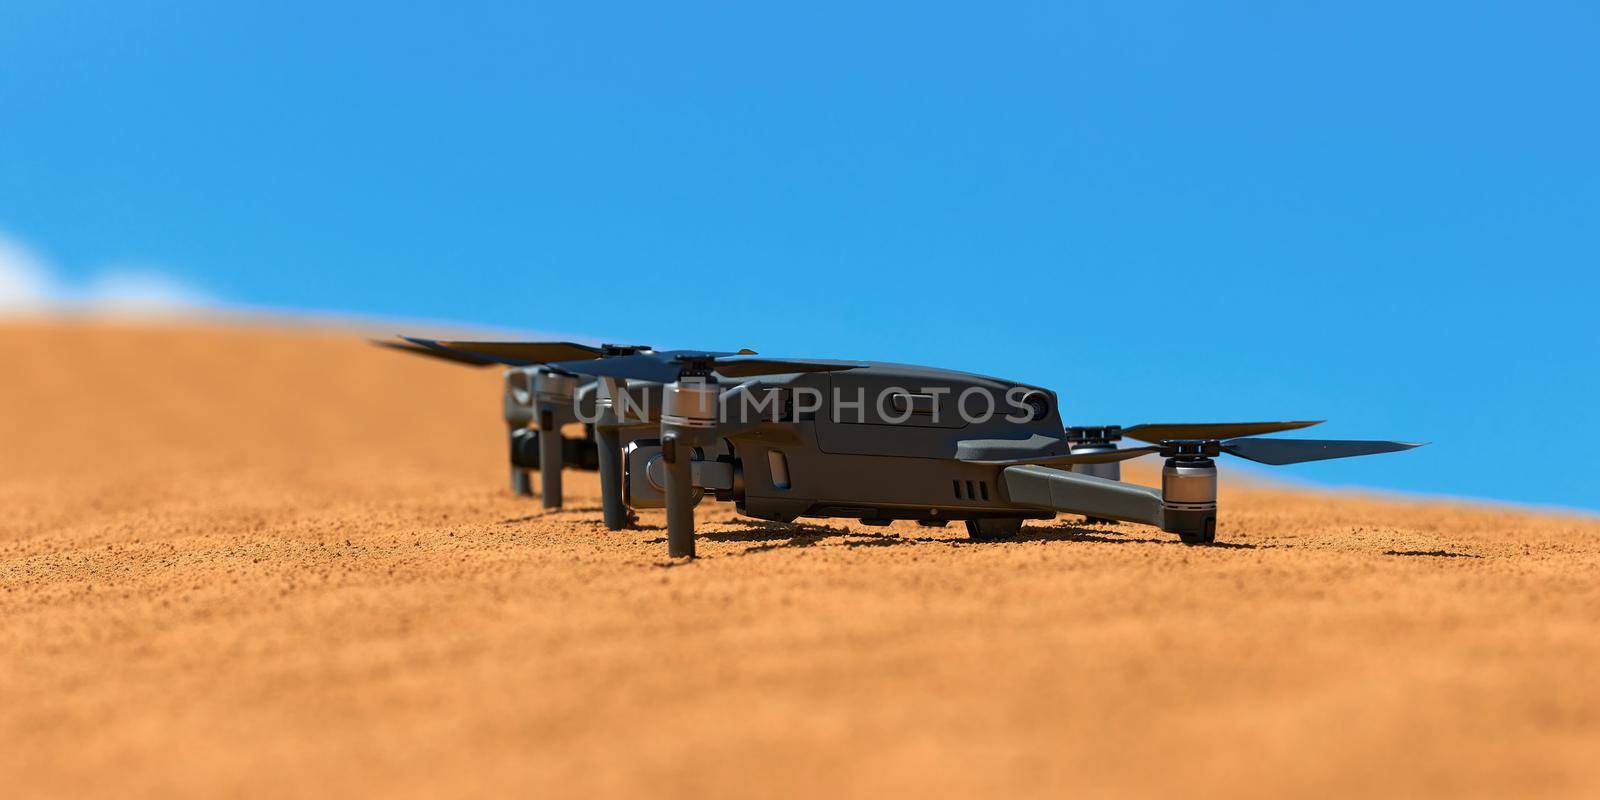 Quadrocopters are built on the sand in the desert waiting for takeoff by EvgeniyQW